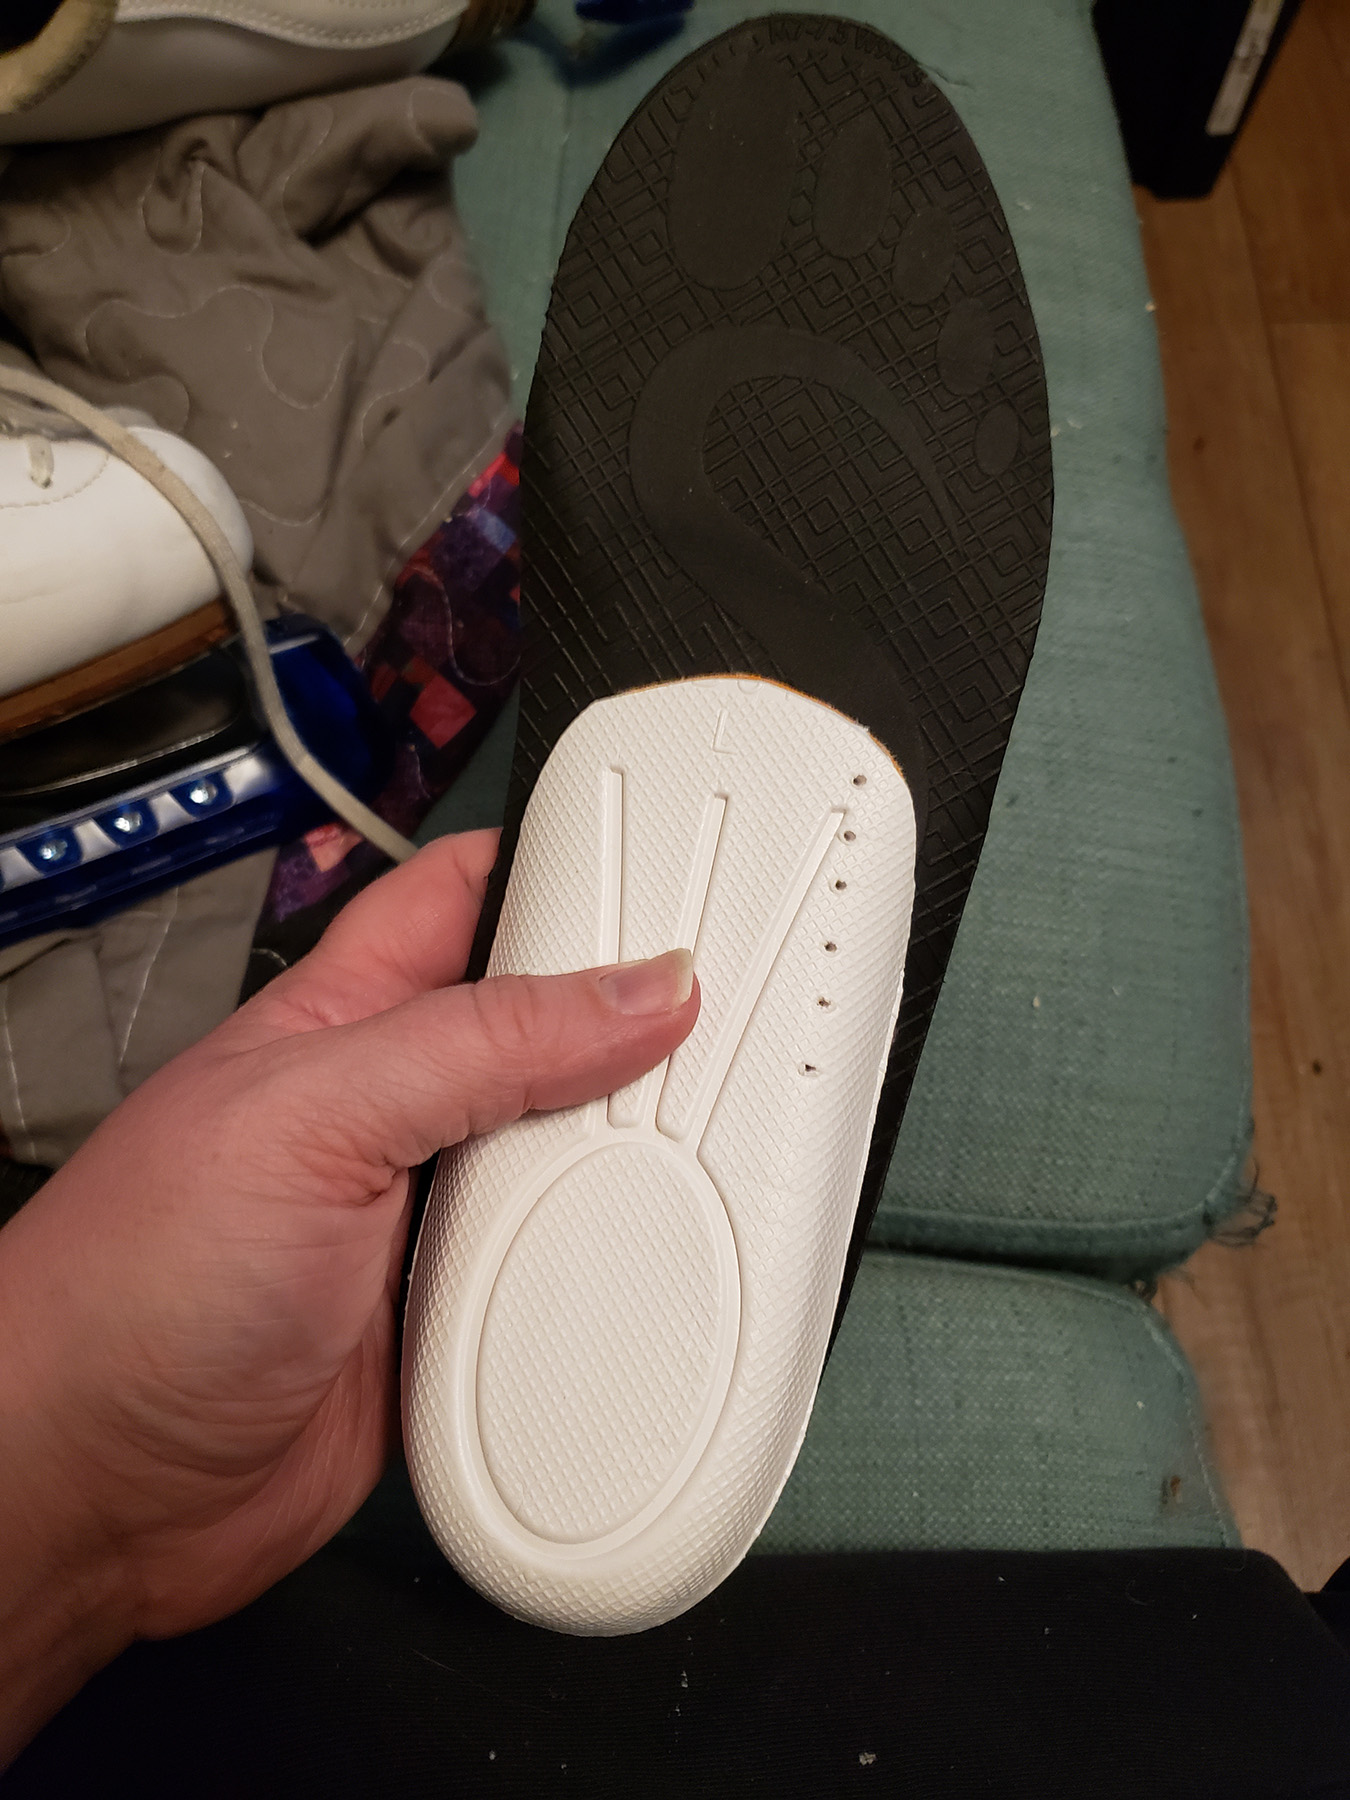 Underside view of a heel lift being held under an arch support insole.